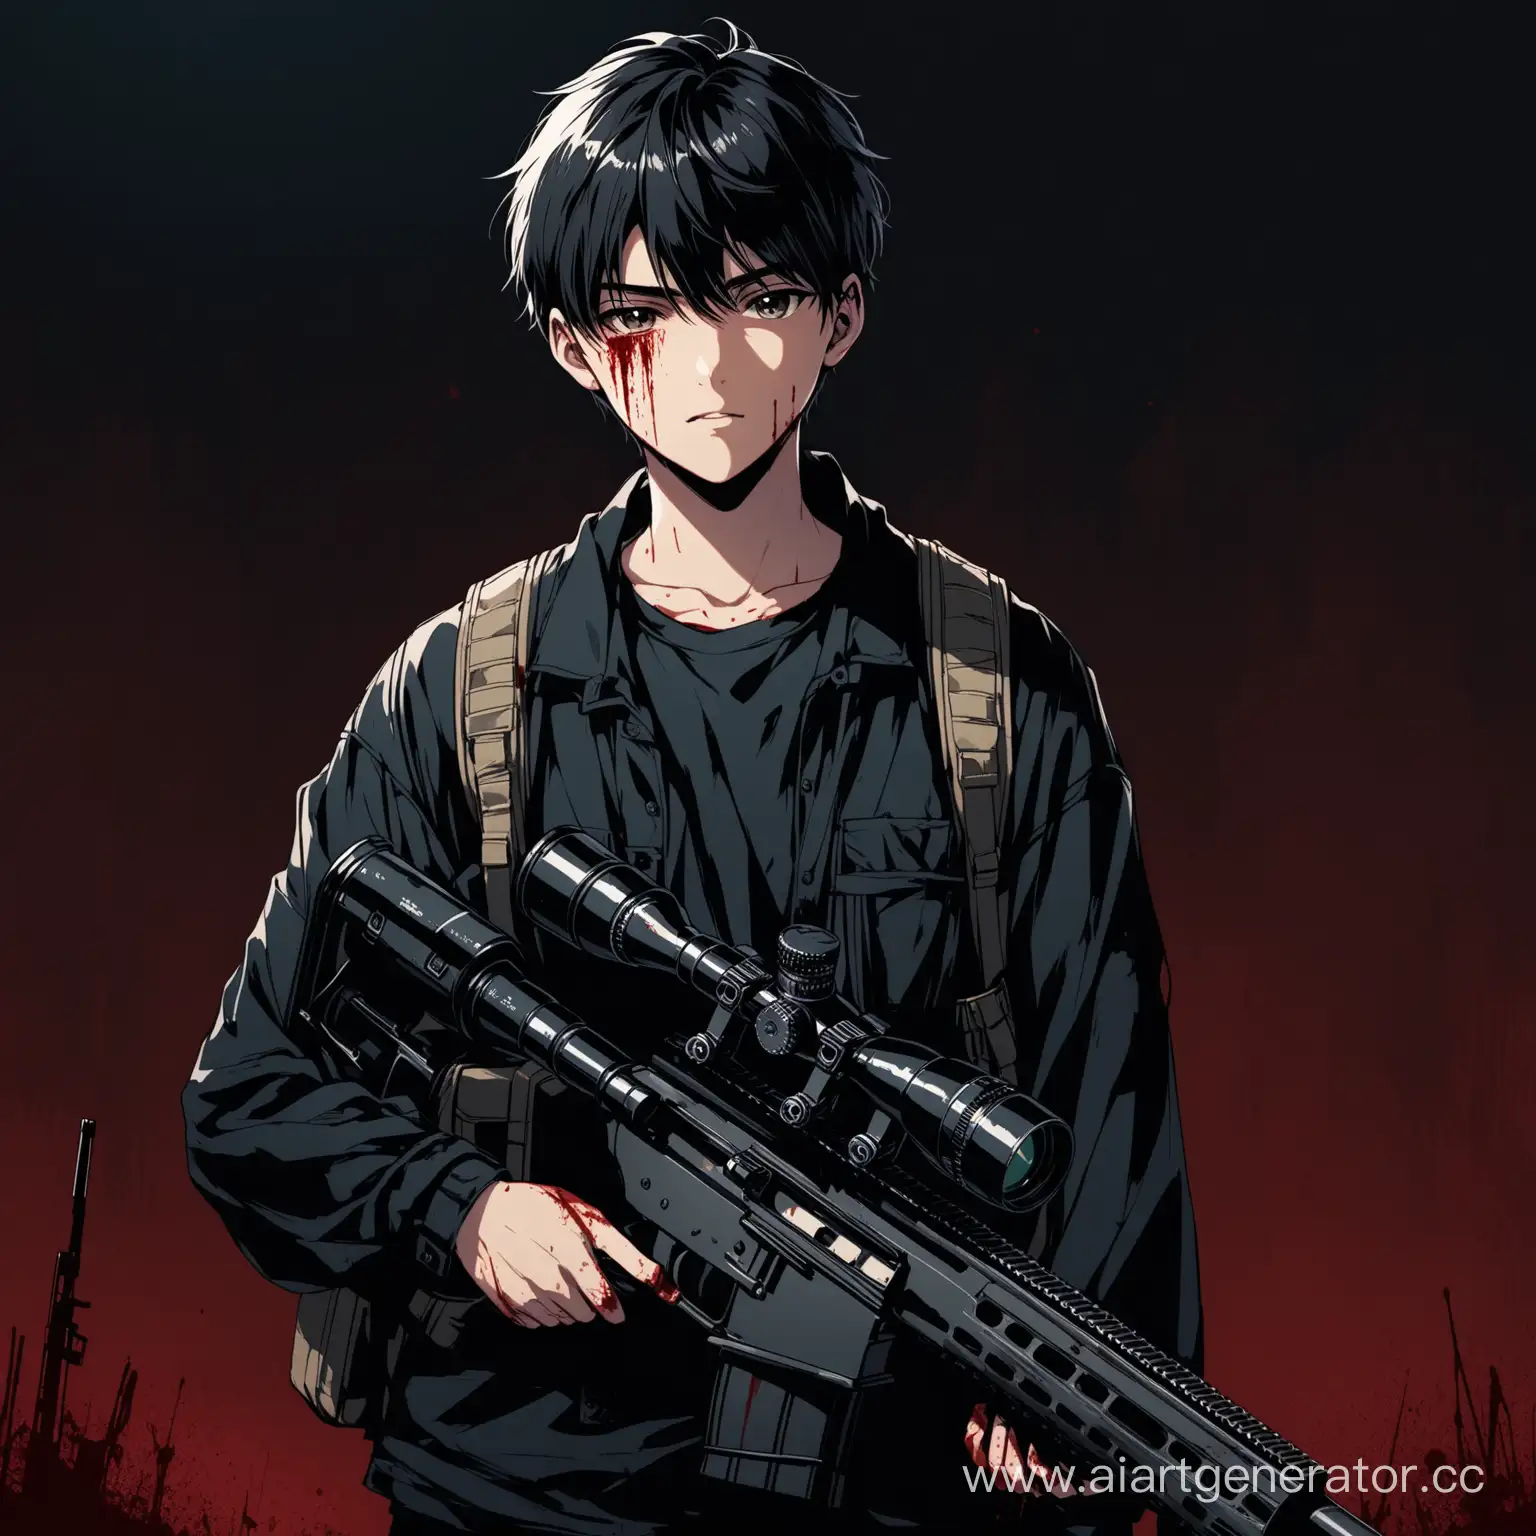 Youth-in-Casual-Attire-with-Sniper-Rifle